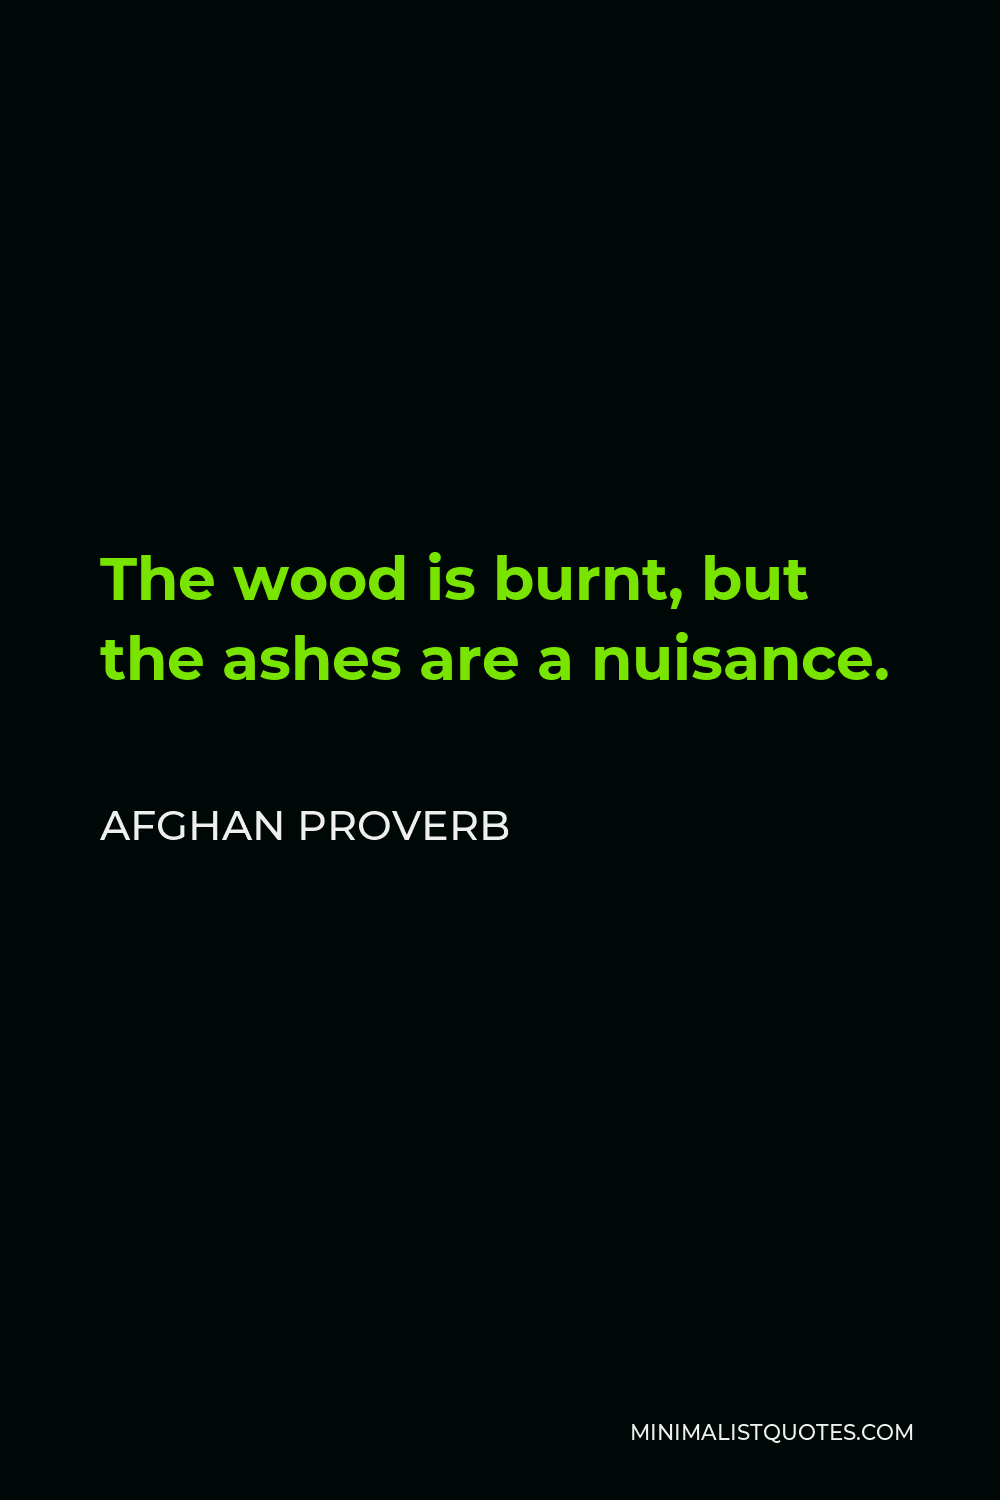 Afghan Proverb Quote - The wood is burnt, but the ashes are a nuisance.